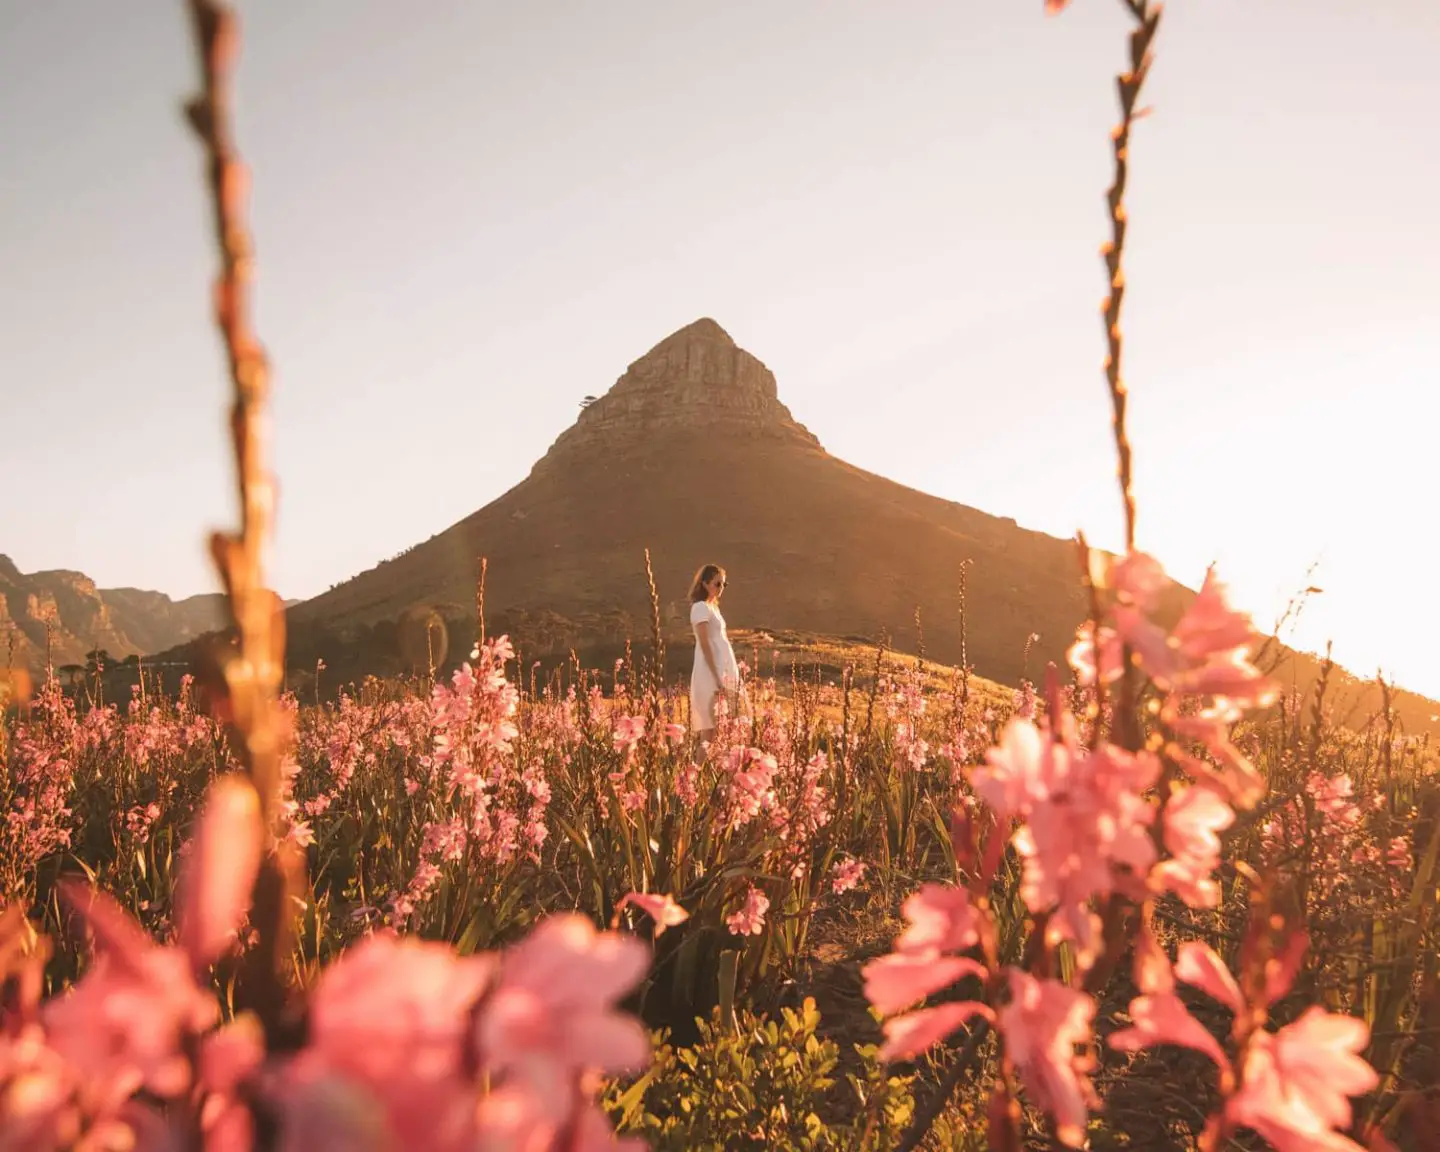 signal hill in cape town